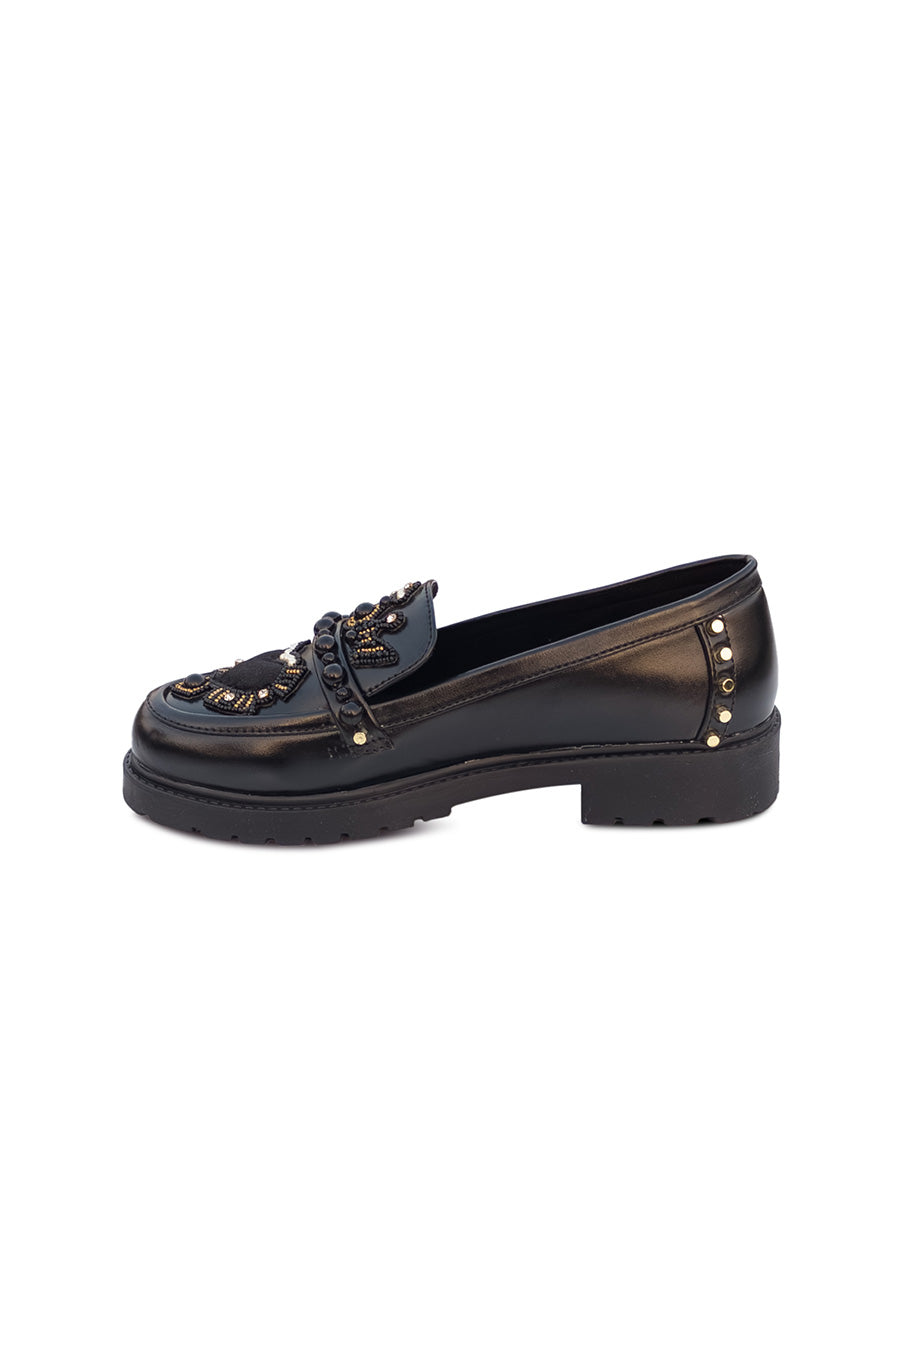 Black Embroidered Dolce Vita Loafers